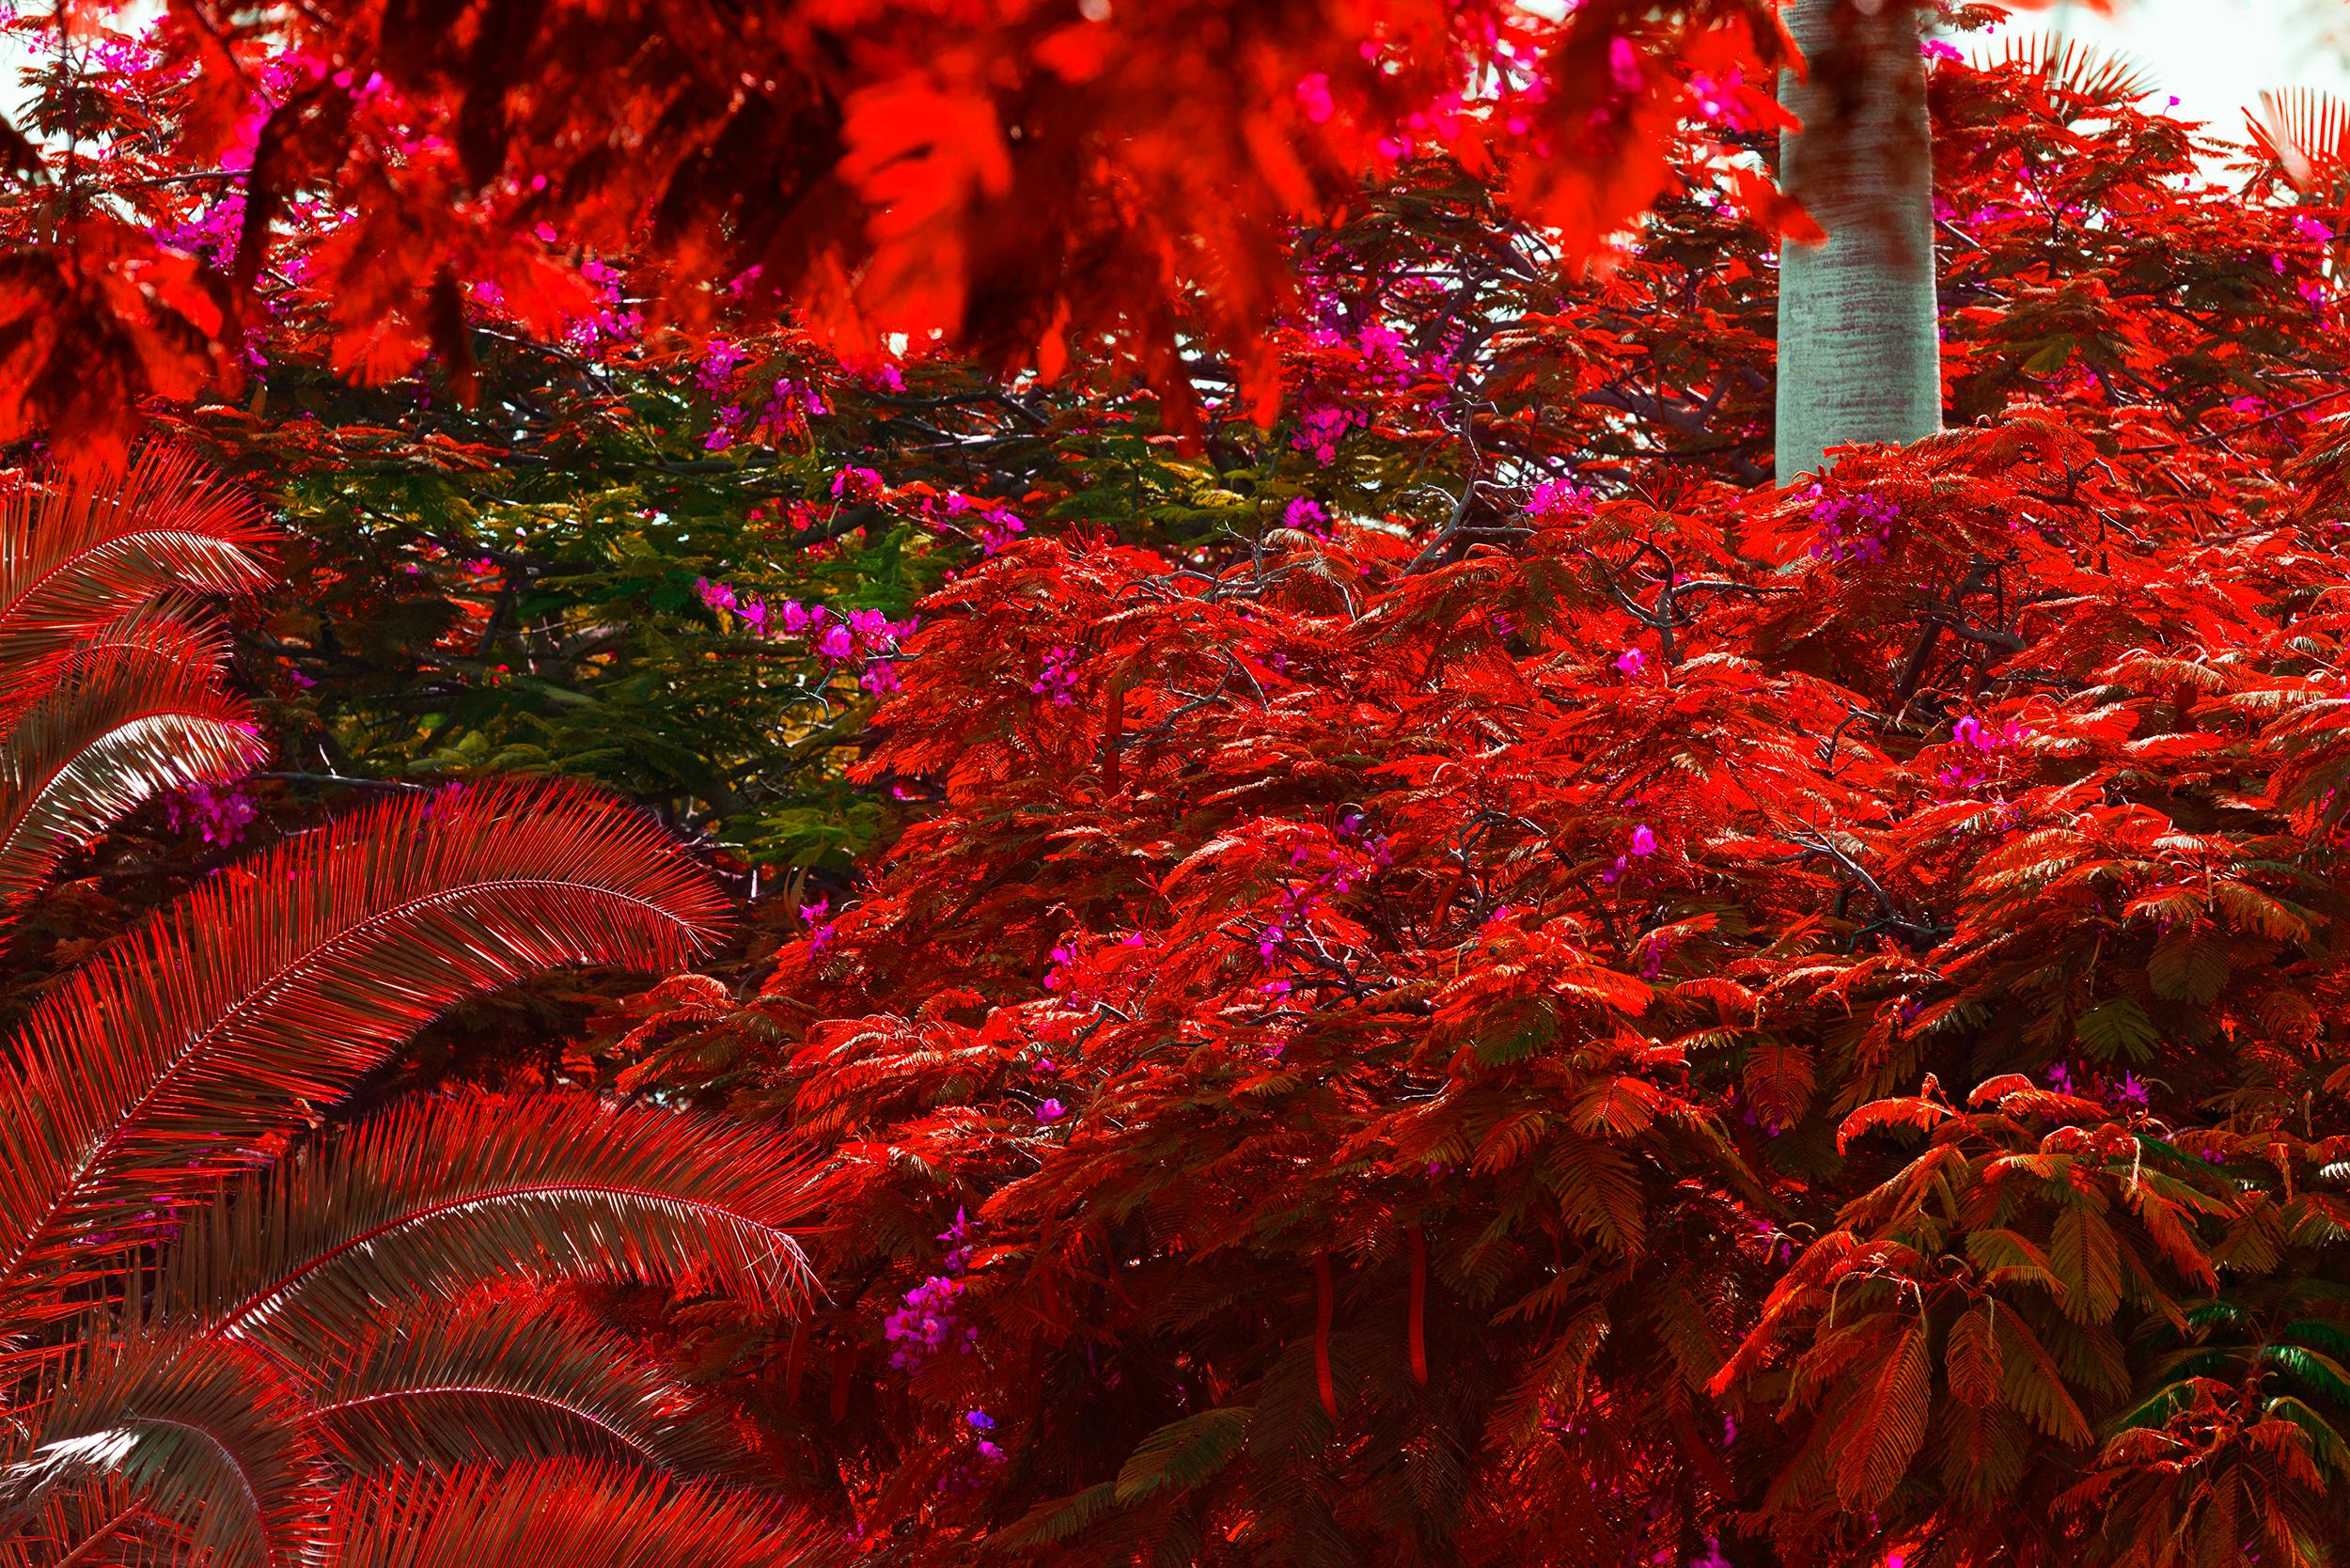 Robert Funk Landscape Photograph - Daydreaming Royal Poincianas in Pink and Red